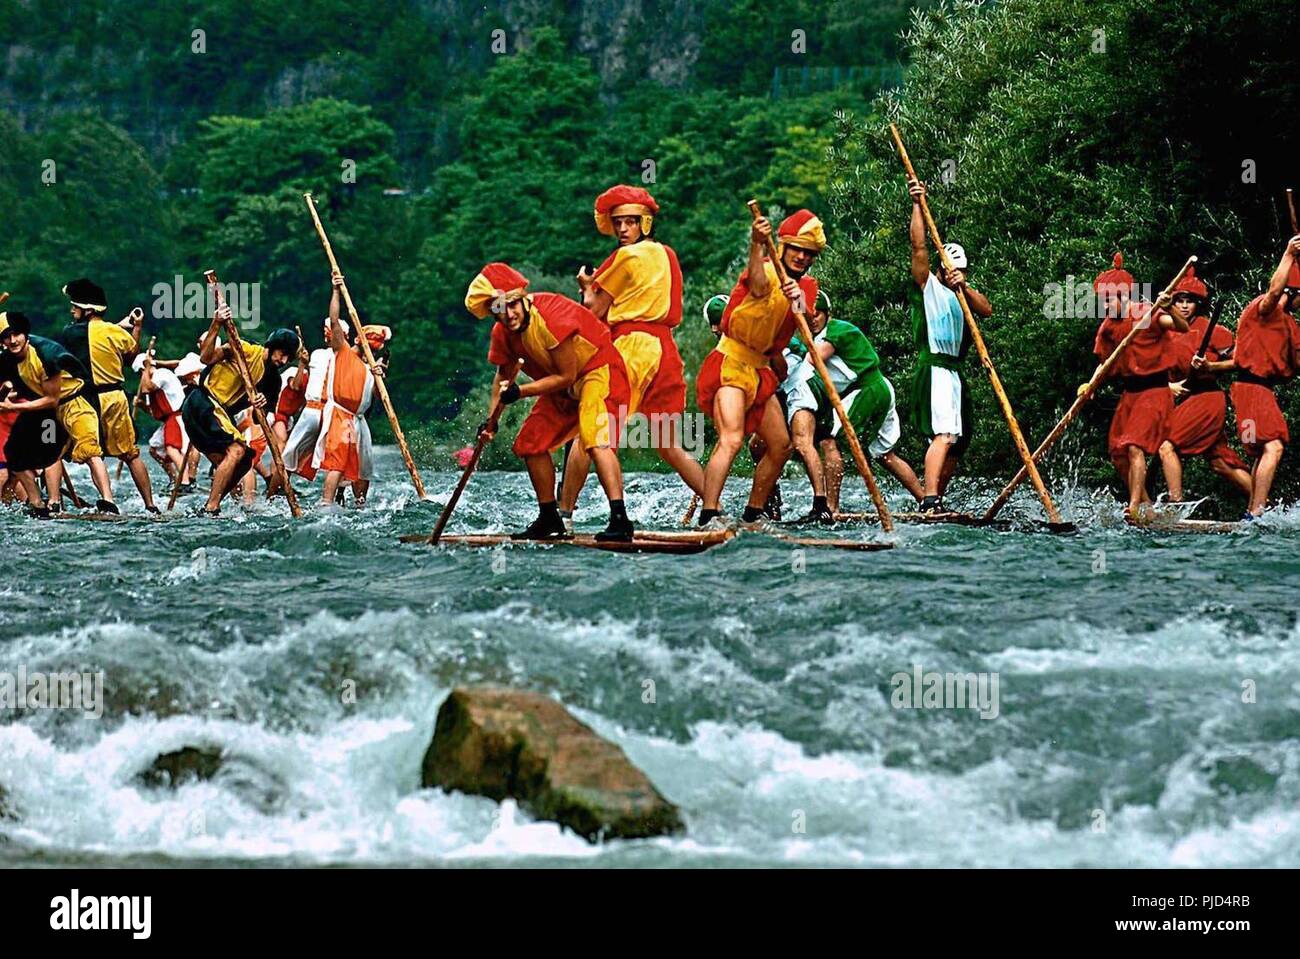 Palio delle Zattere - Raft Race,  July 22, 2-8 p.m., in Valstagna; this annual competition takes place on a panoramic stretch of the Brenta River in commemoration of the terrible flood of 1966; the parade starts at 3 p.m., the raft race at 5 p.m.; entertainment with flag-throwers, live Venetian folk music and traditional trade exhibit in Piazza San Marco; food booths feature fried trout and other specialties; free entrance. Stock Photo